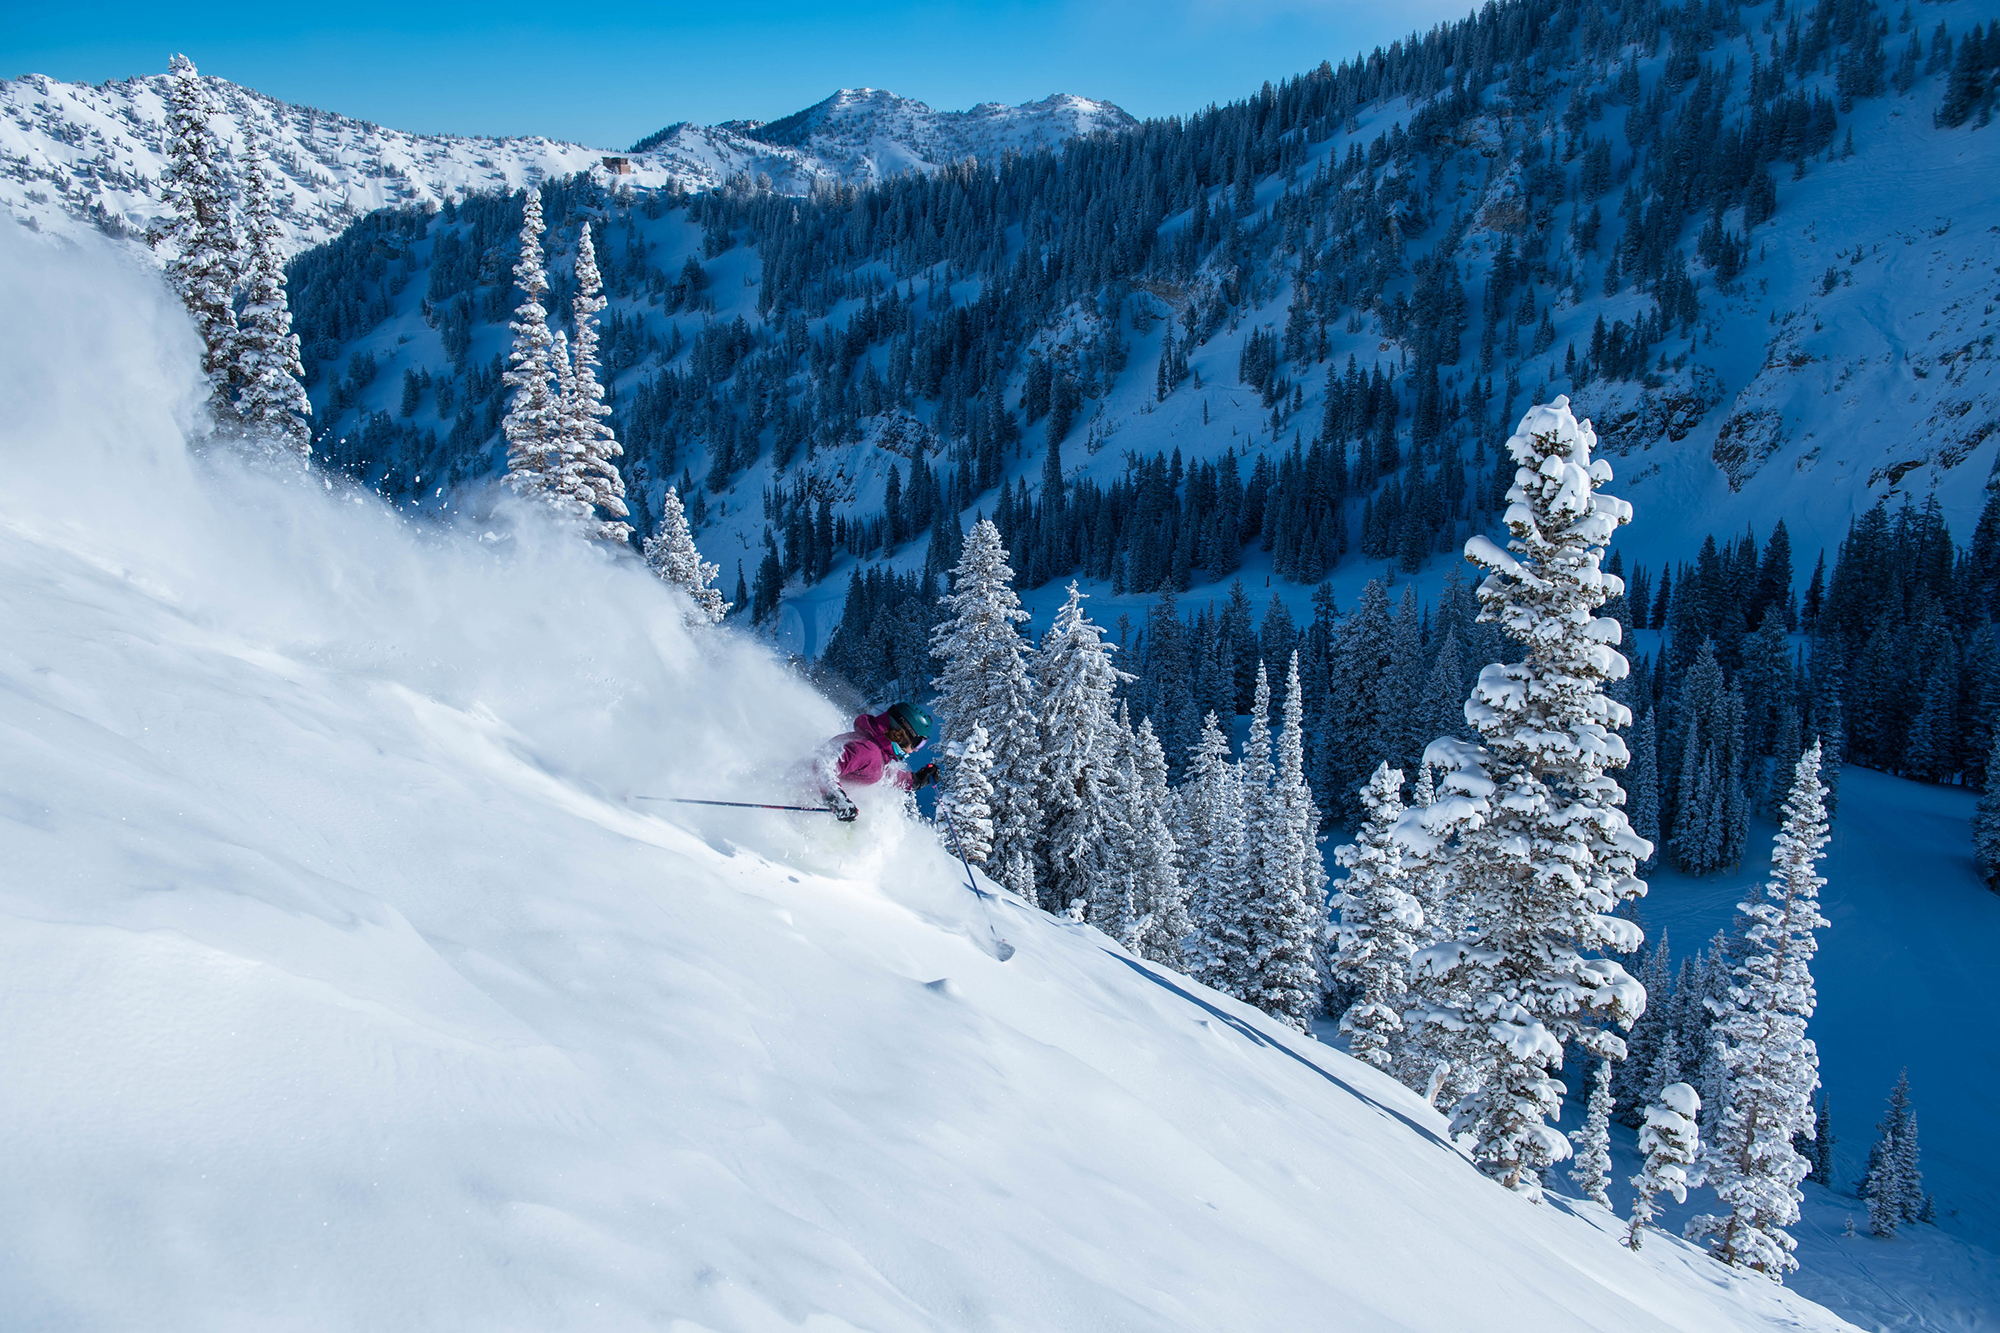 Powder quest: Extreme skiing gets more accessible